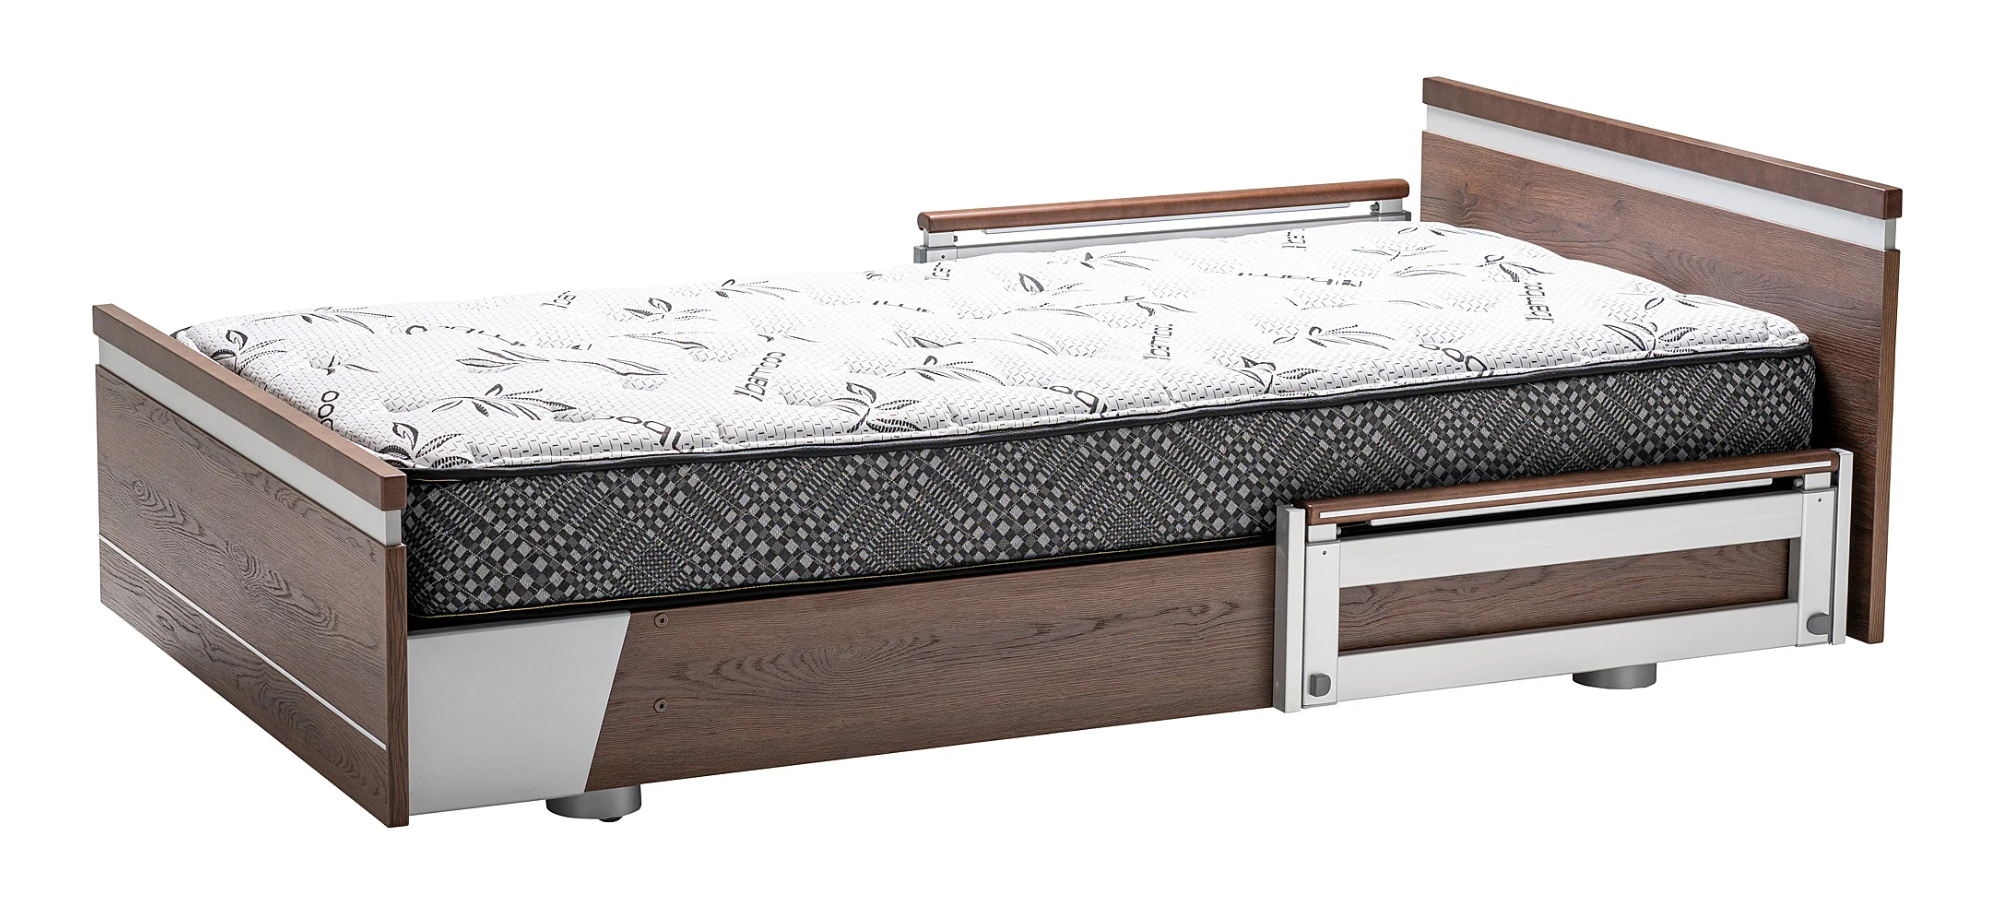 hospital bed Ontario Home Hospital Beds in Ontario | Buy Hospital Bed Ontario